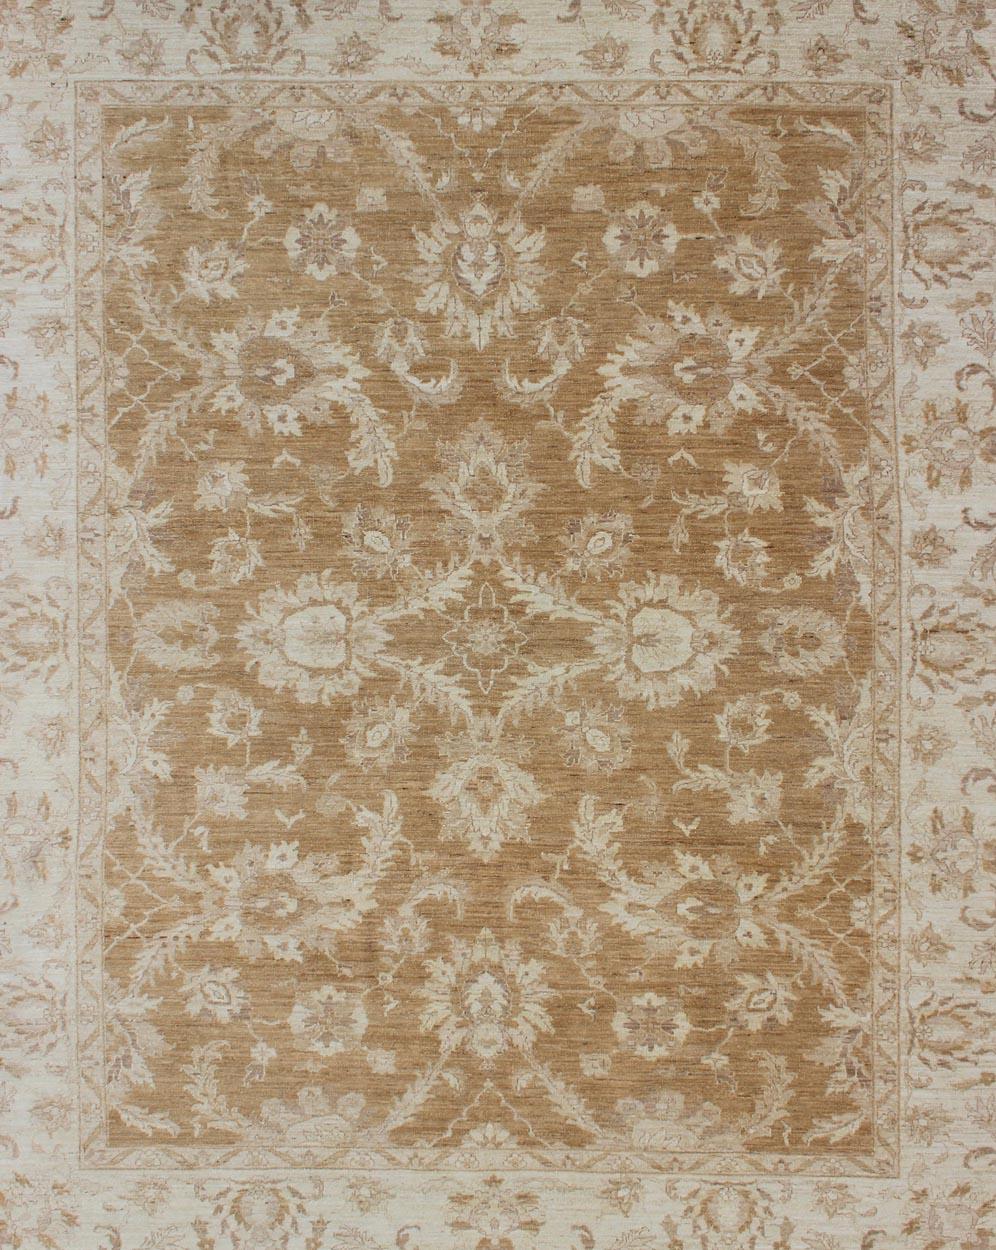 Cream and Caramel floral Sultanabad design rug by Keivan Woven Arts / DSP-BC11322 country of origin / type: Afghanistan / circa 1980.

This elegantly handwoven rug is from Afghanistan and woven from the finest wool to create a soft and luxurious